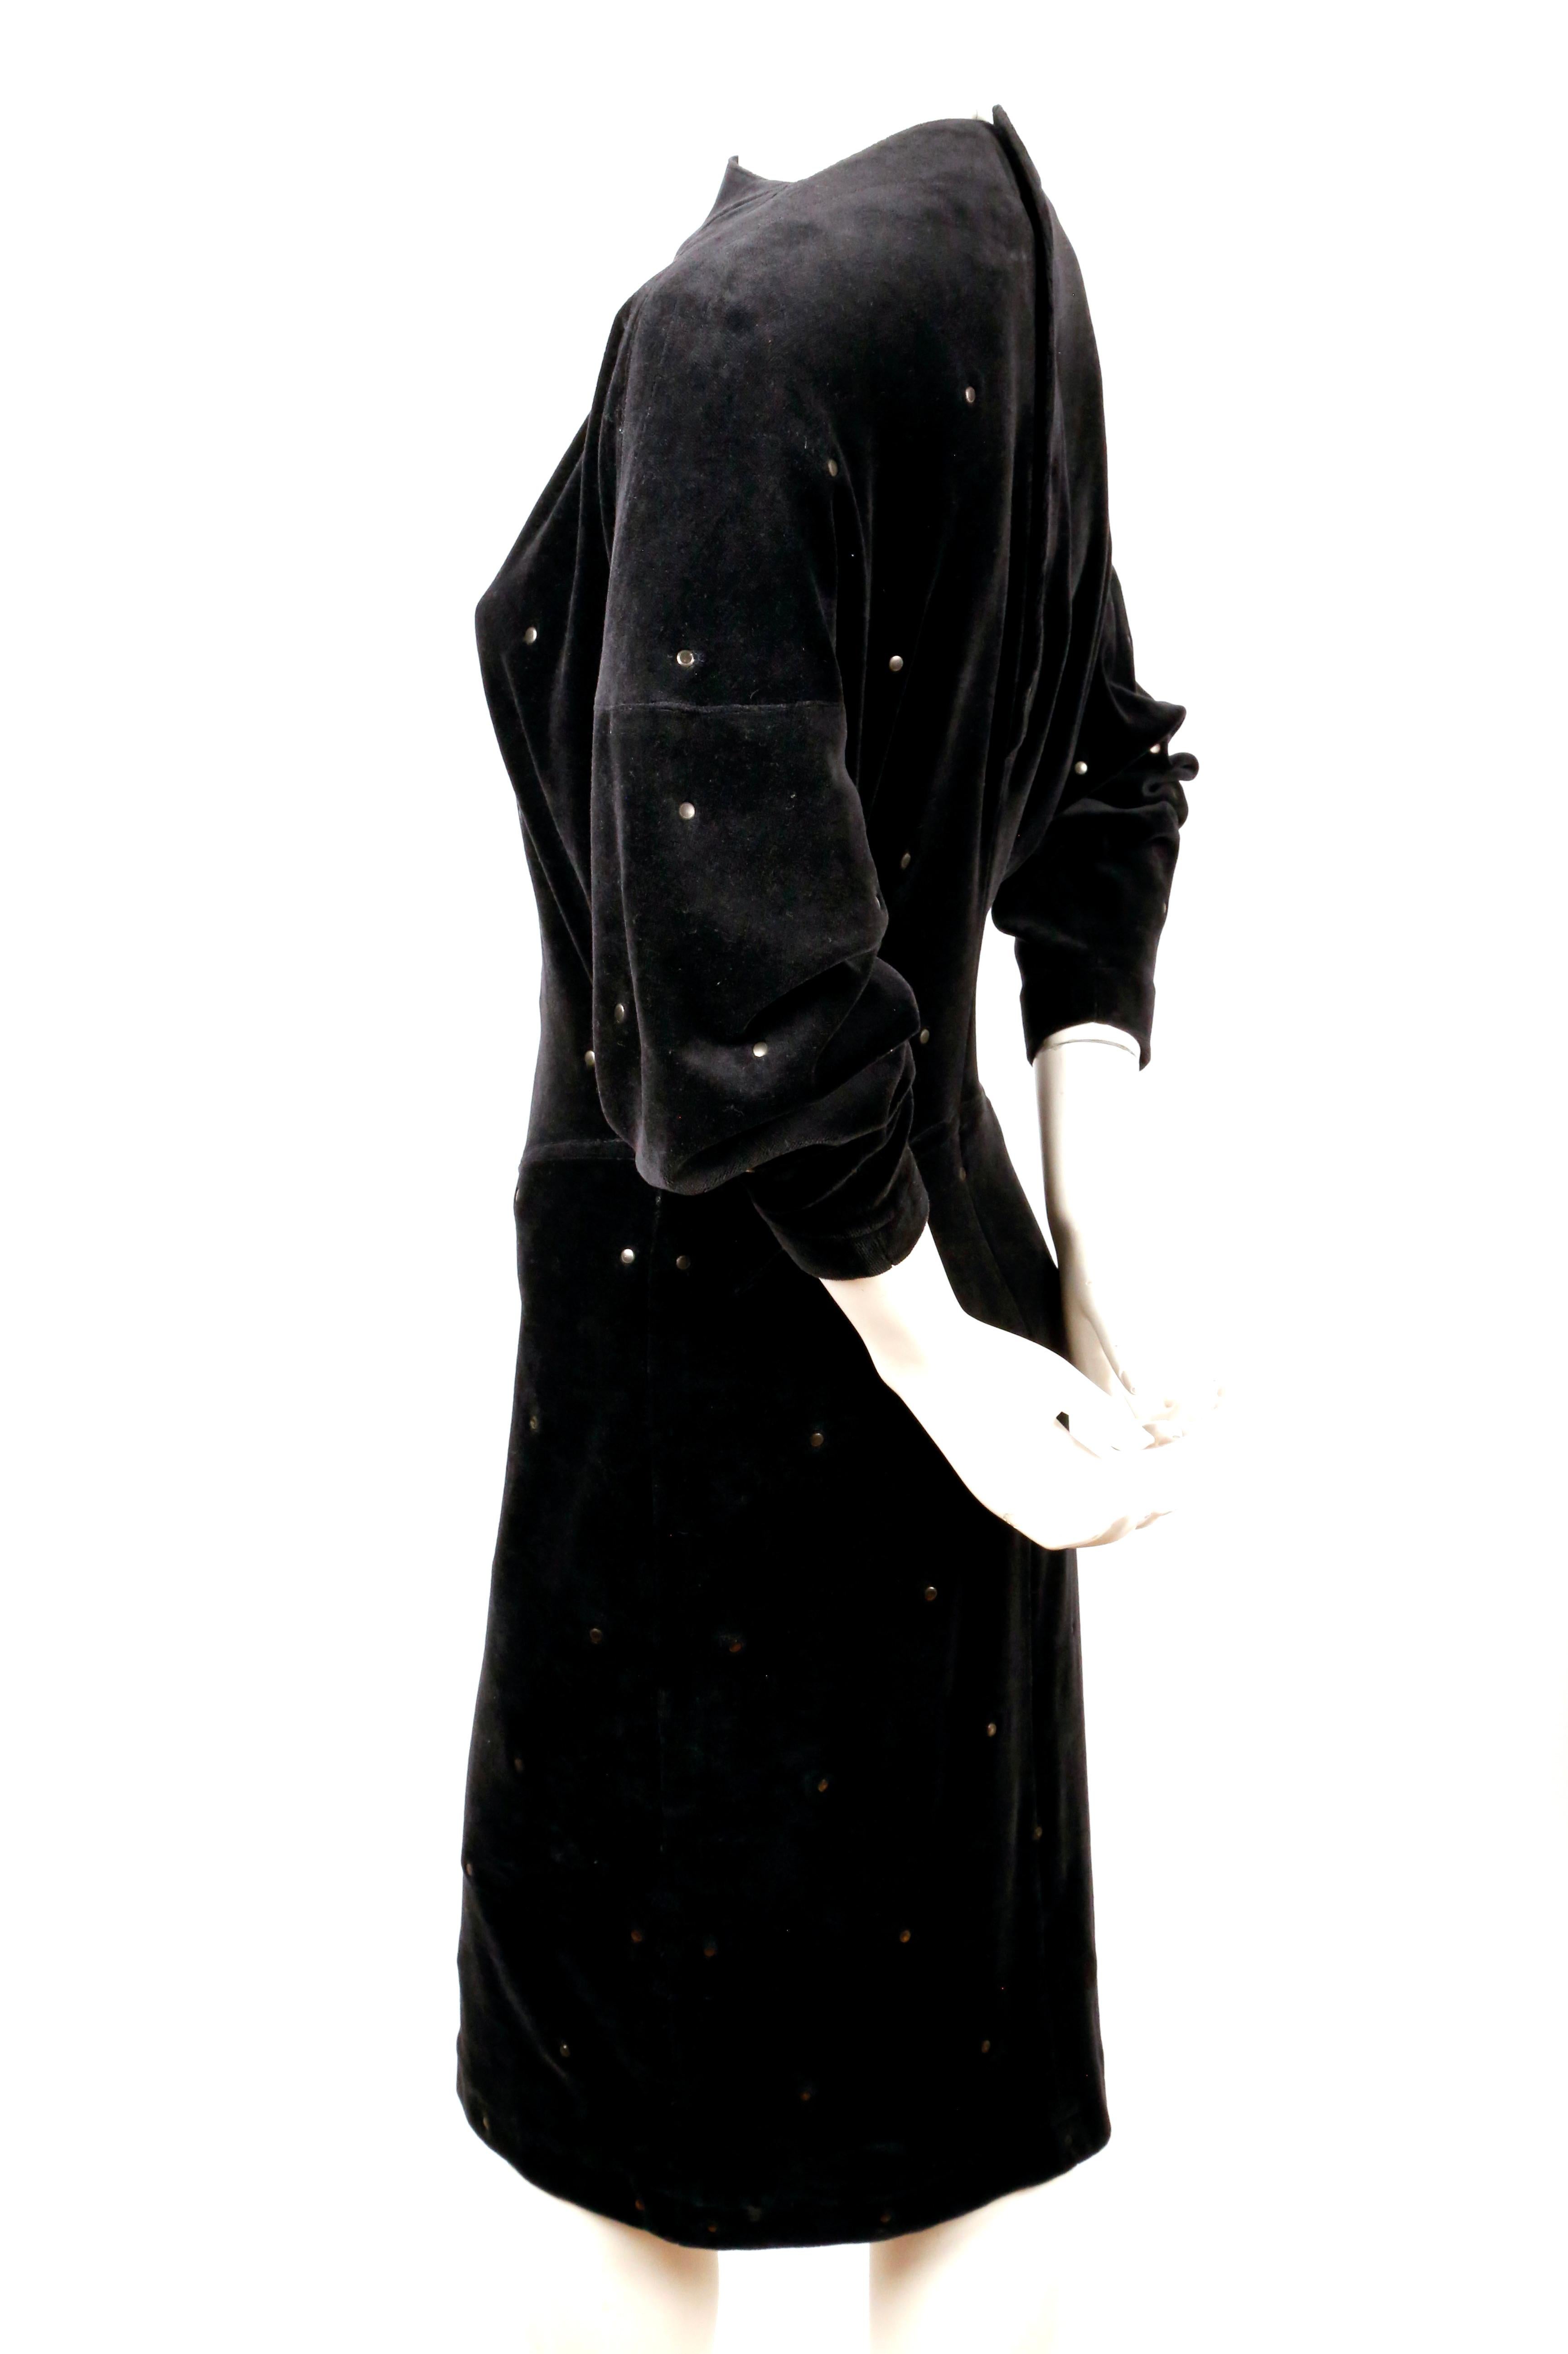 Very rare, black velour dress with studs designed by Azzedine Alaia dating to the early 1980's. Labeled a French size 42 however this was not clipped on the size 2 mannequin. Approximate measurements: waist 28